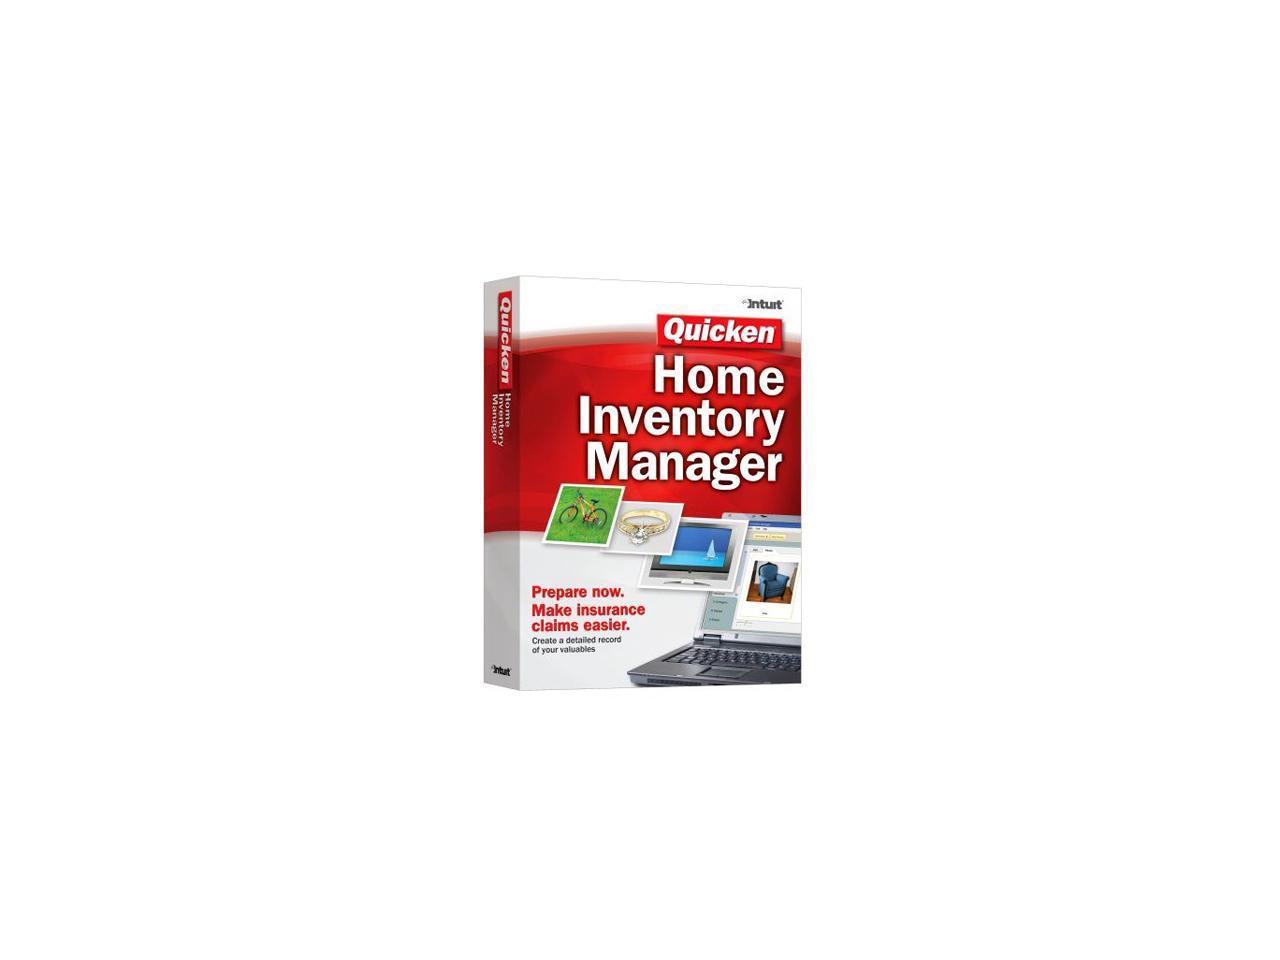 download quicken home inventory manager